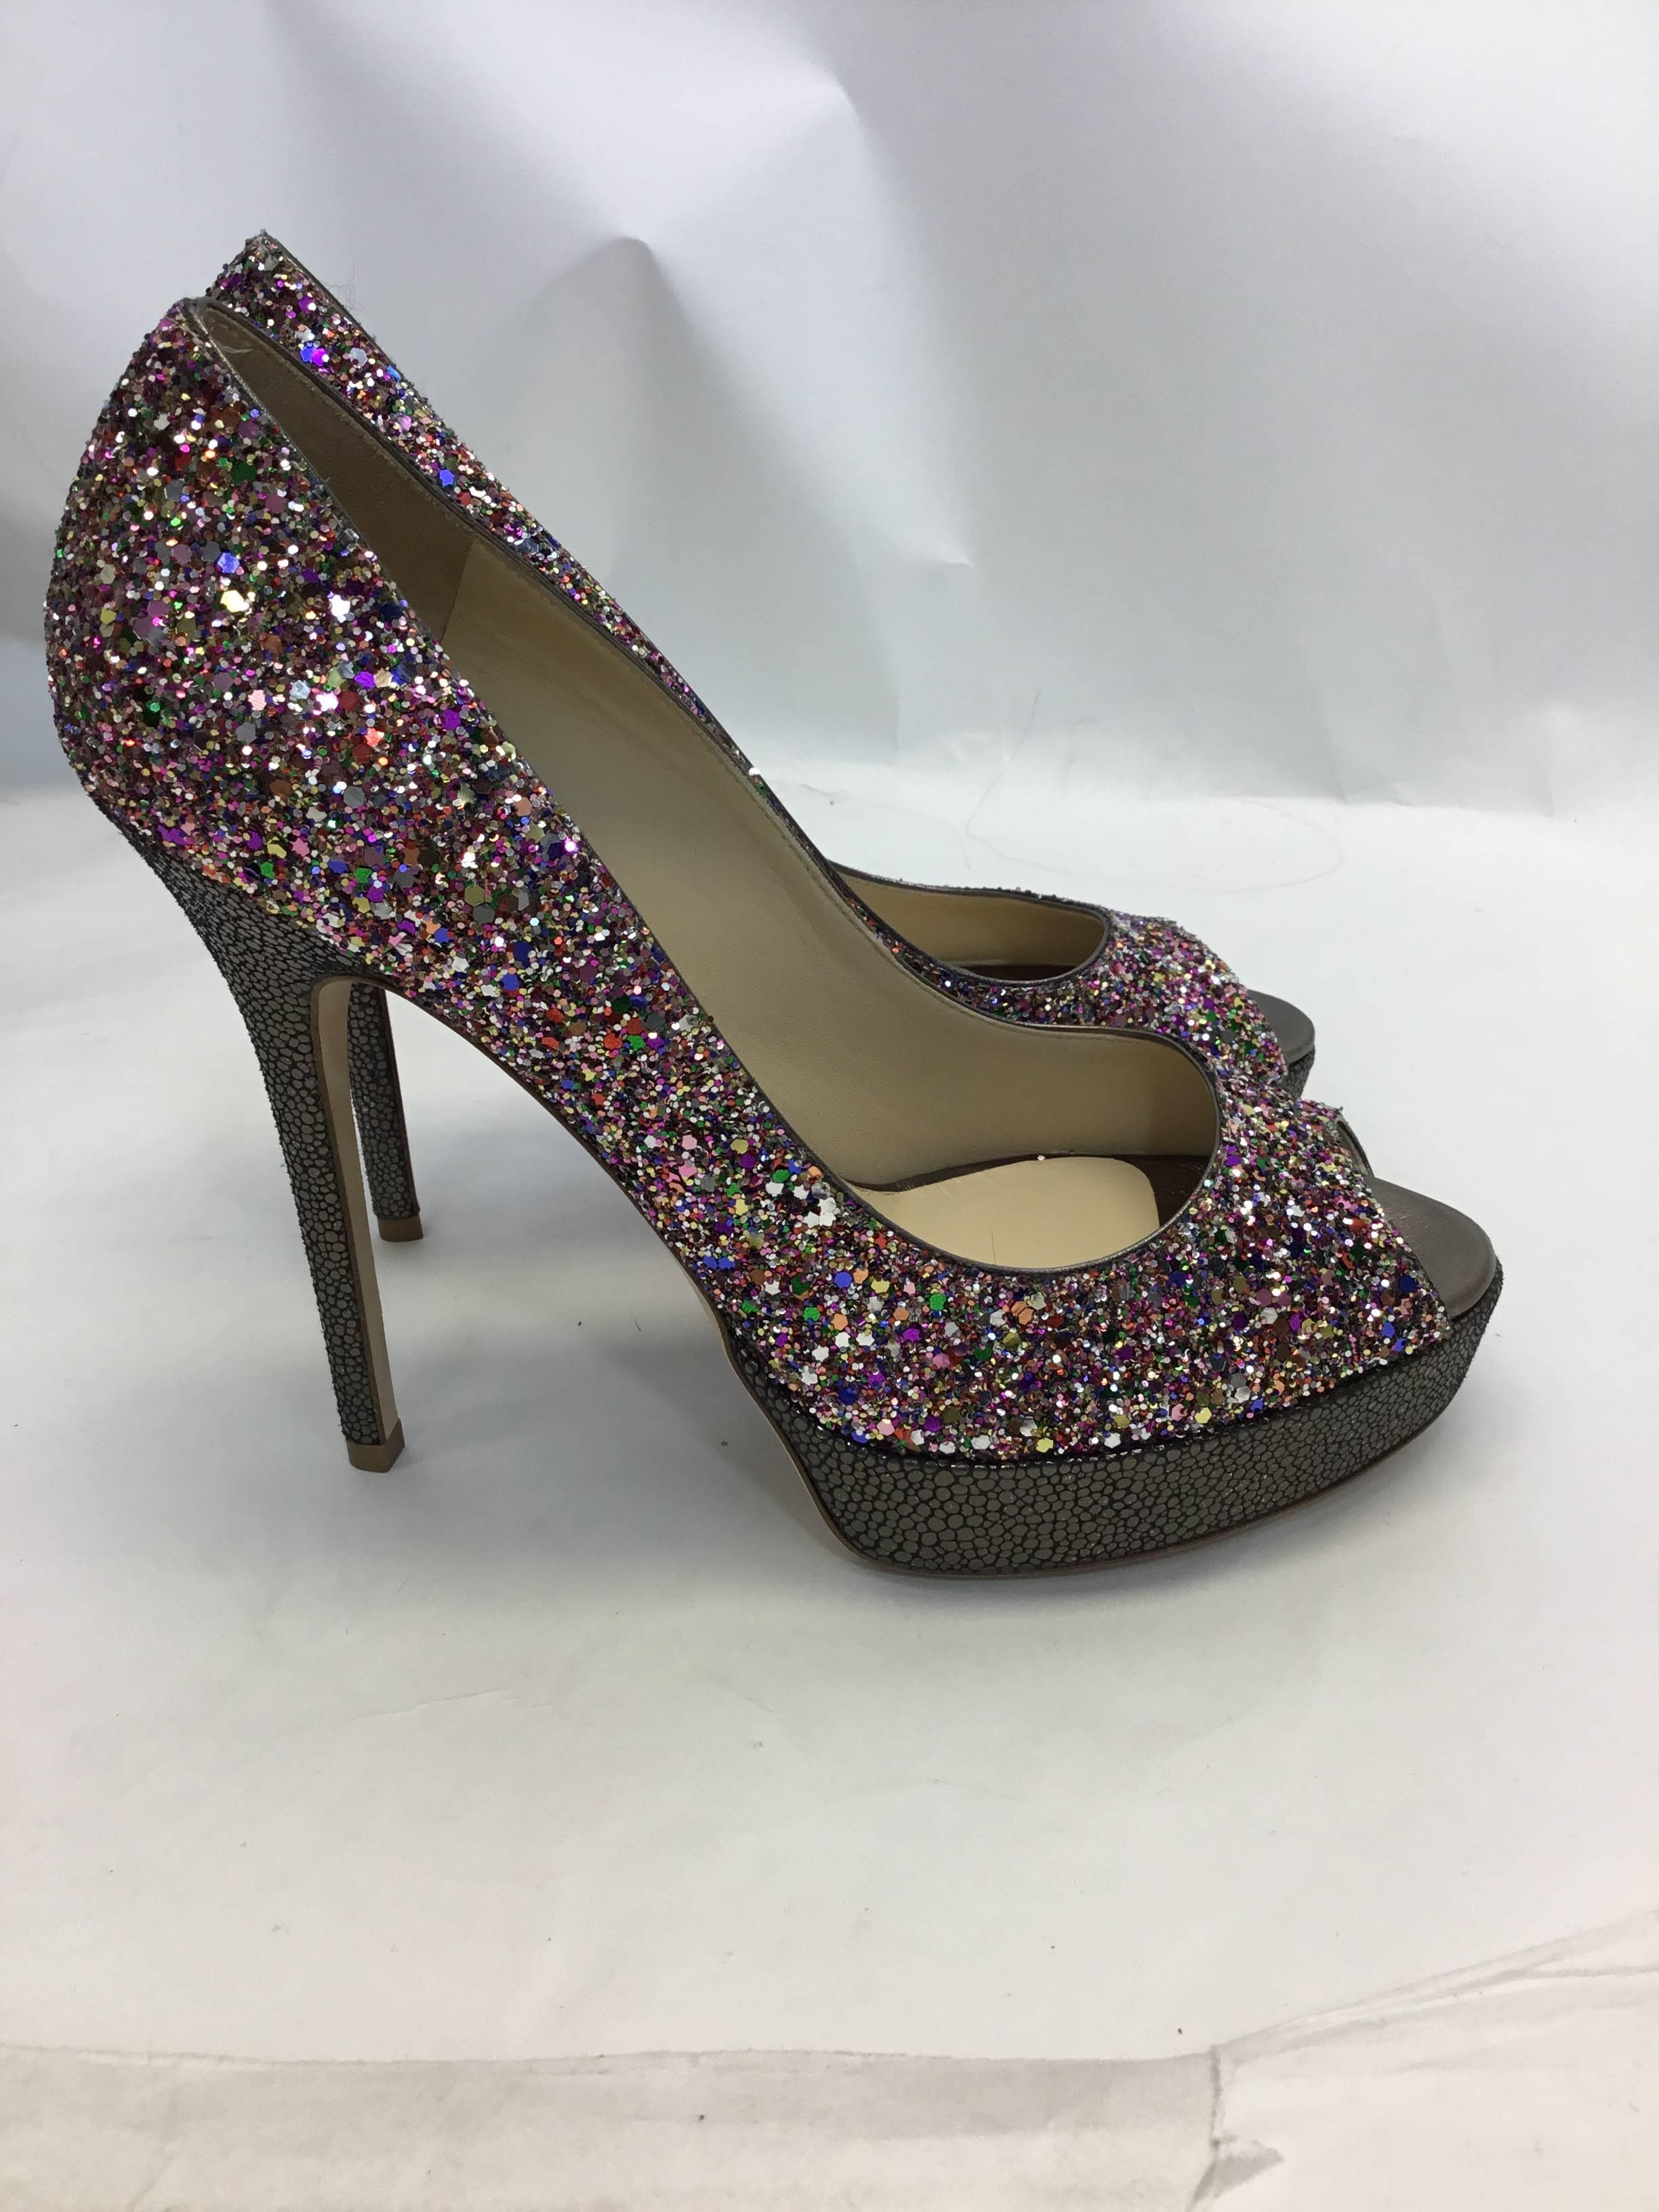 Jimmy Choo New Glitter & Snake Printed Stilletos In New Condition For Sale In Narberth, PA